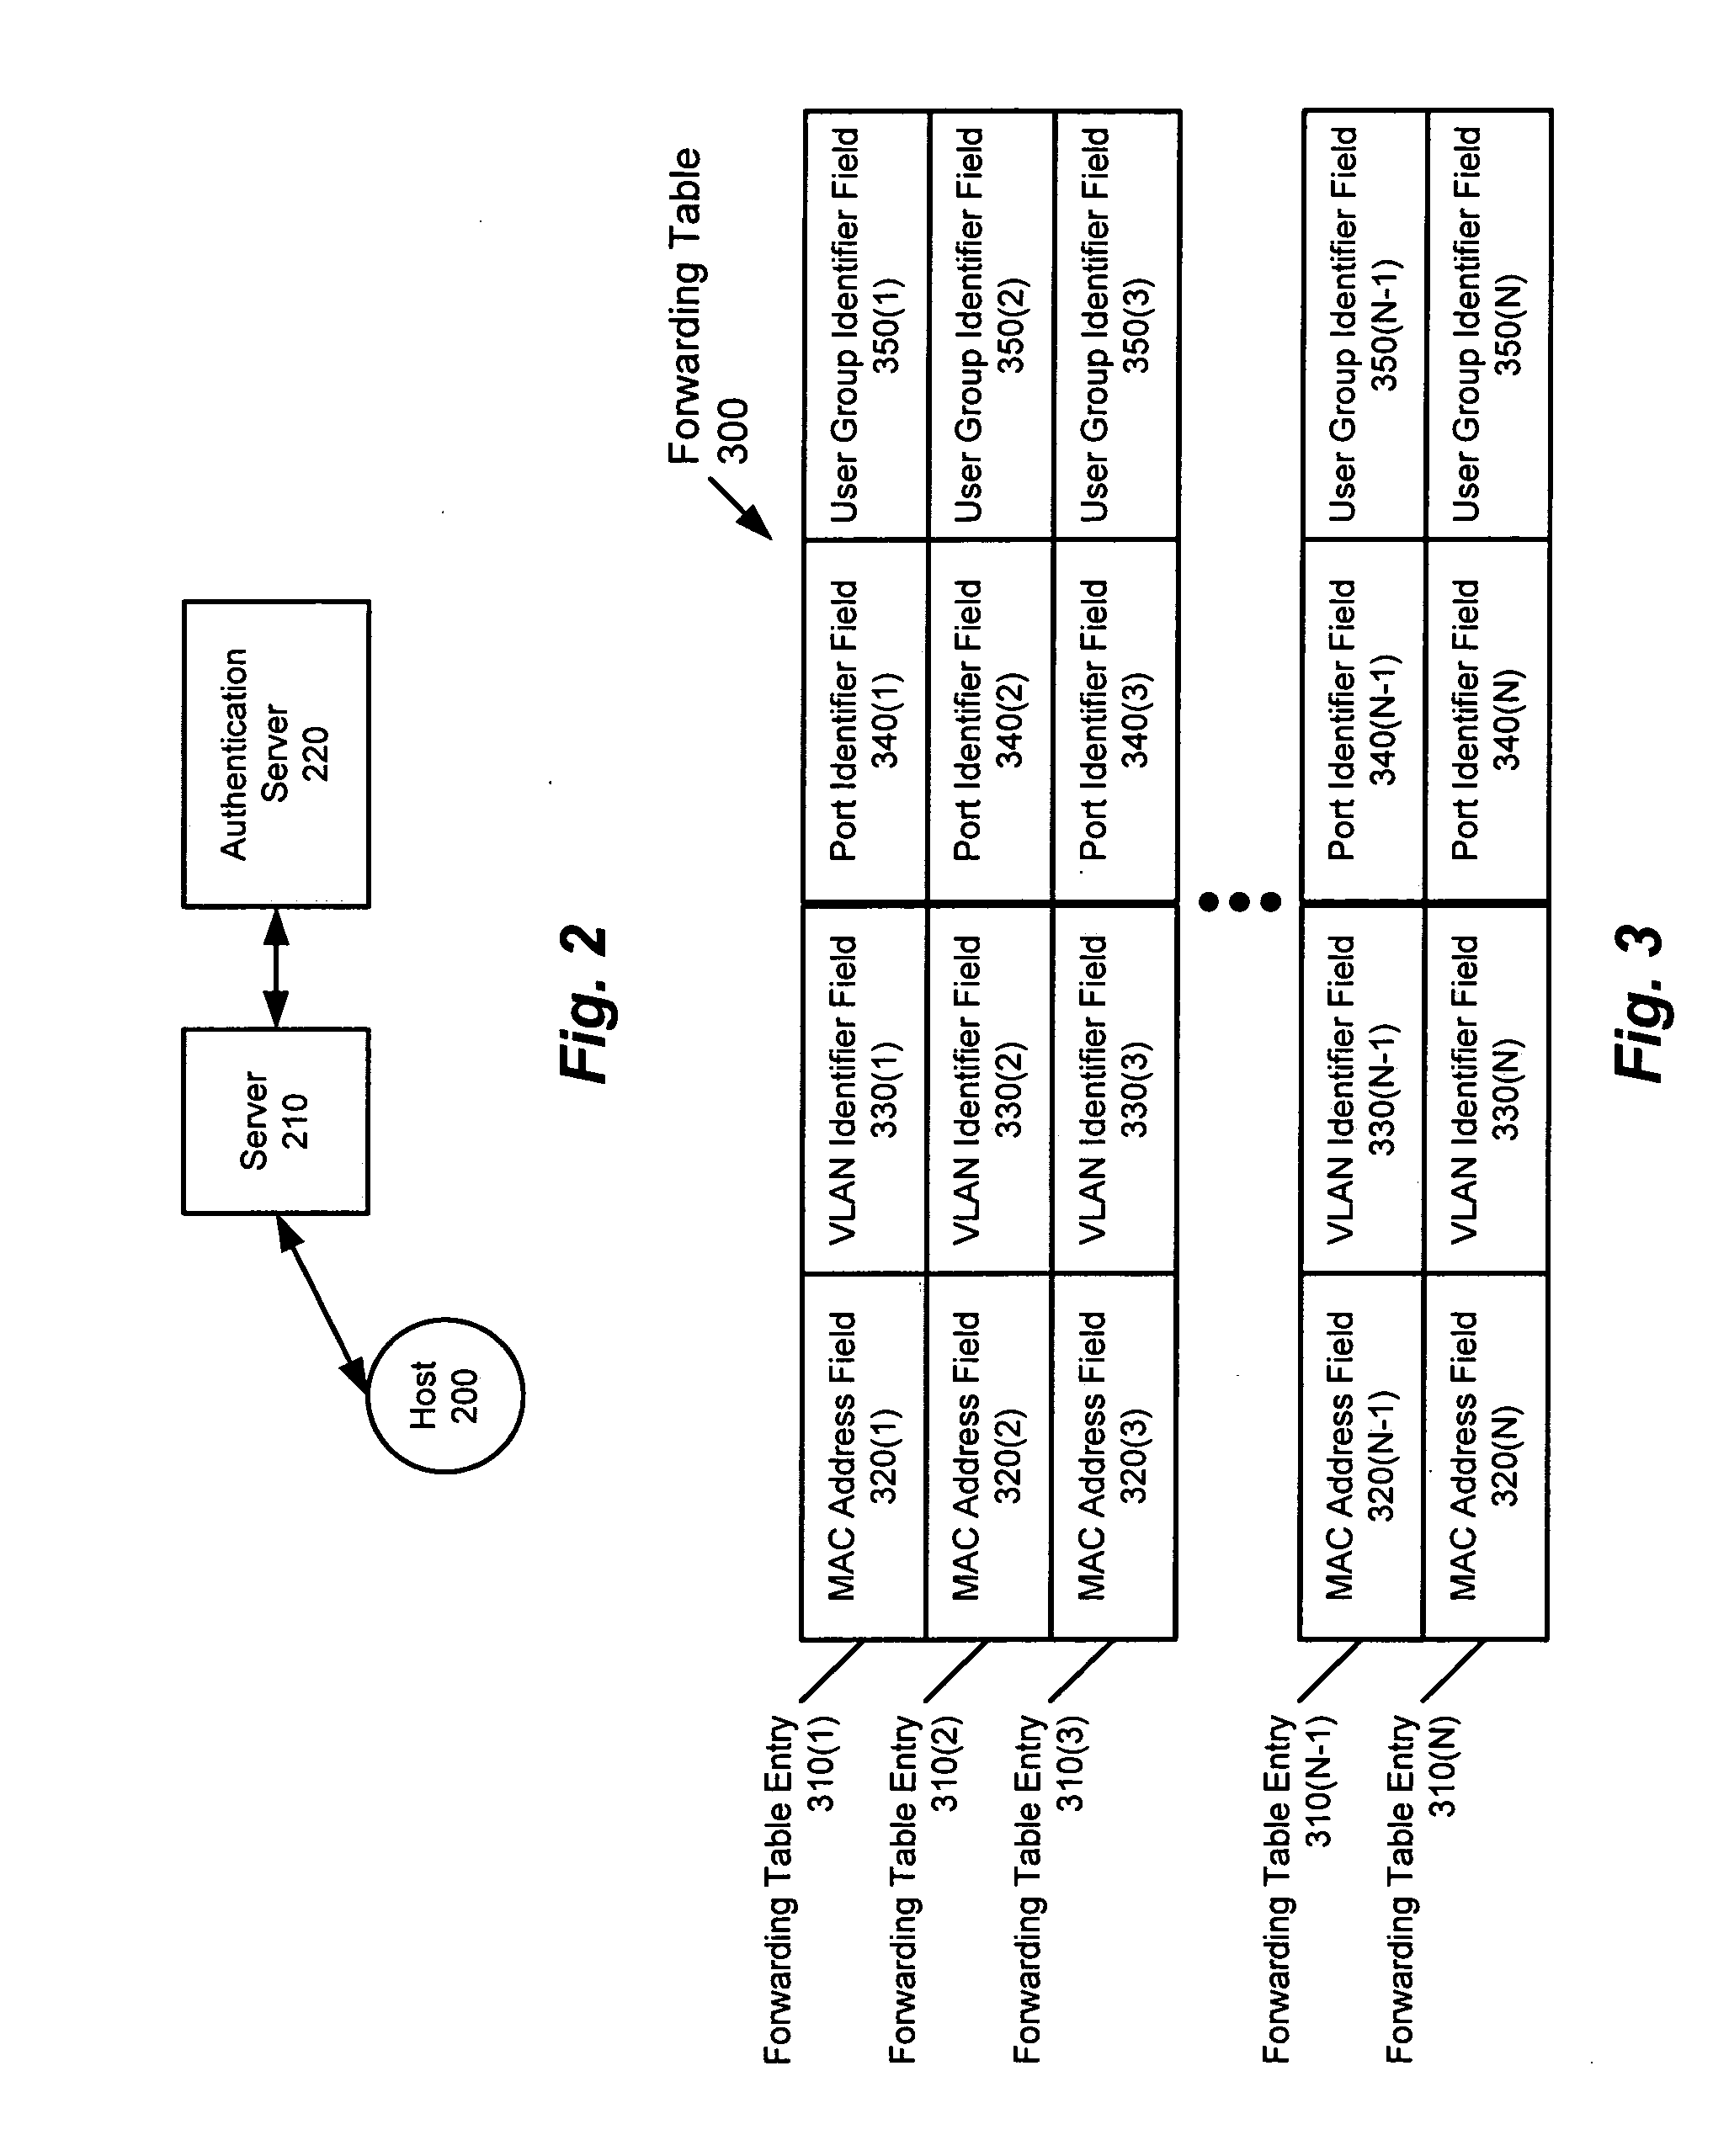 Method and apparatus for providing network security using role-based access control